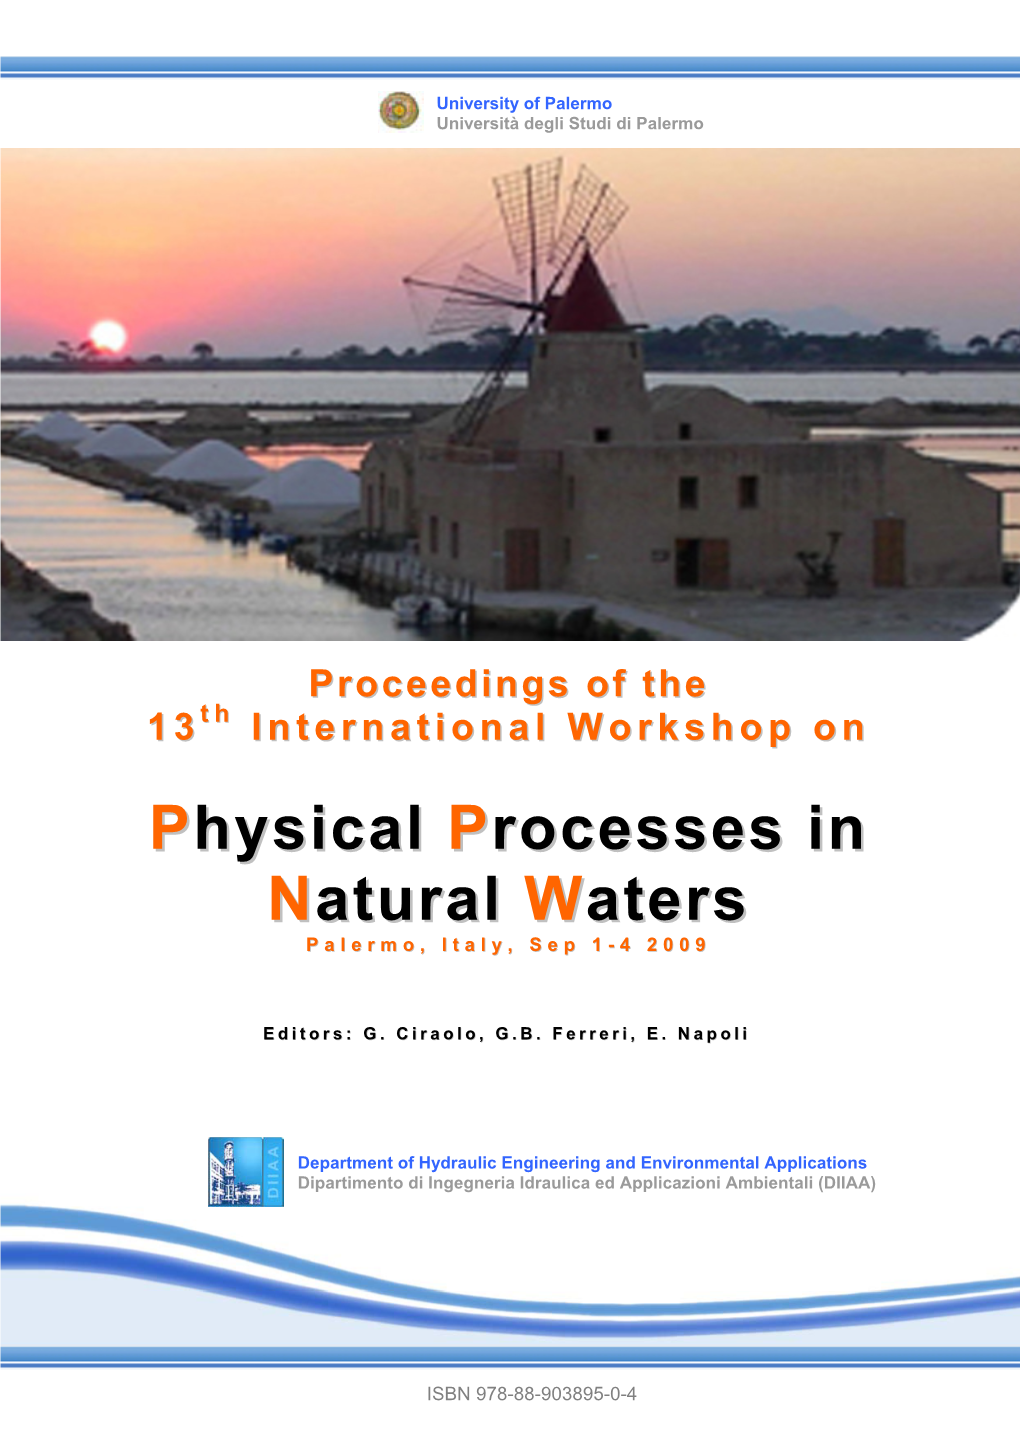 Physical Processes in Natural Waters, Palermo, Italy, 1-4 September 2009